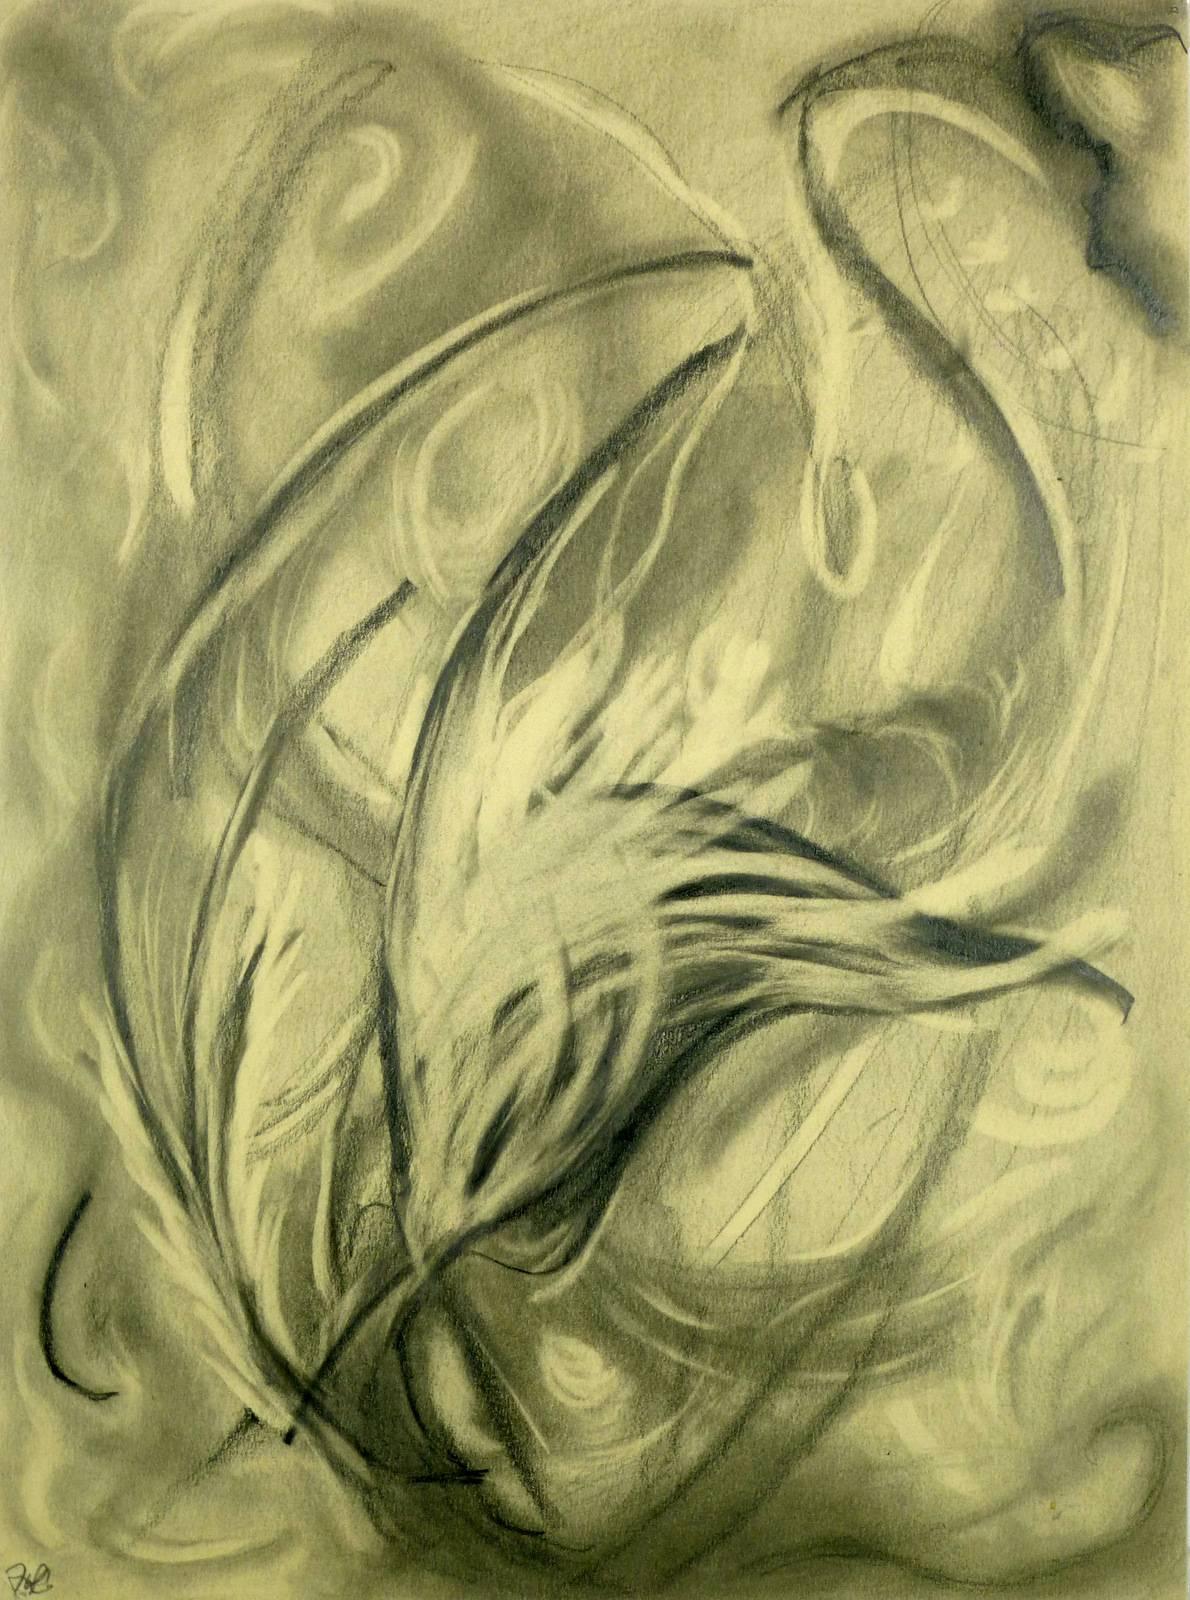 Hugo Esteban Abstract Drawing - Dynamic Flow Abstract